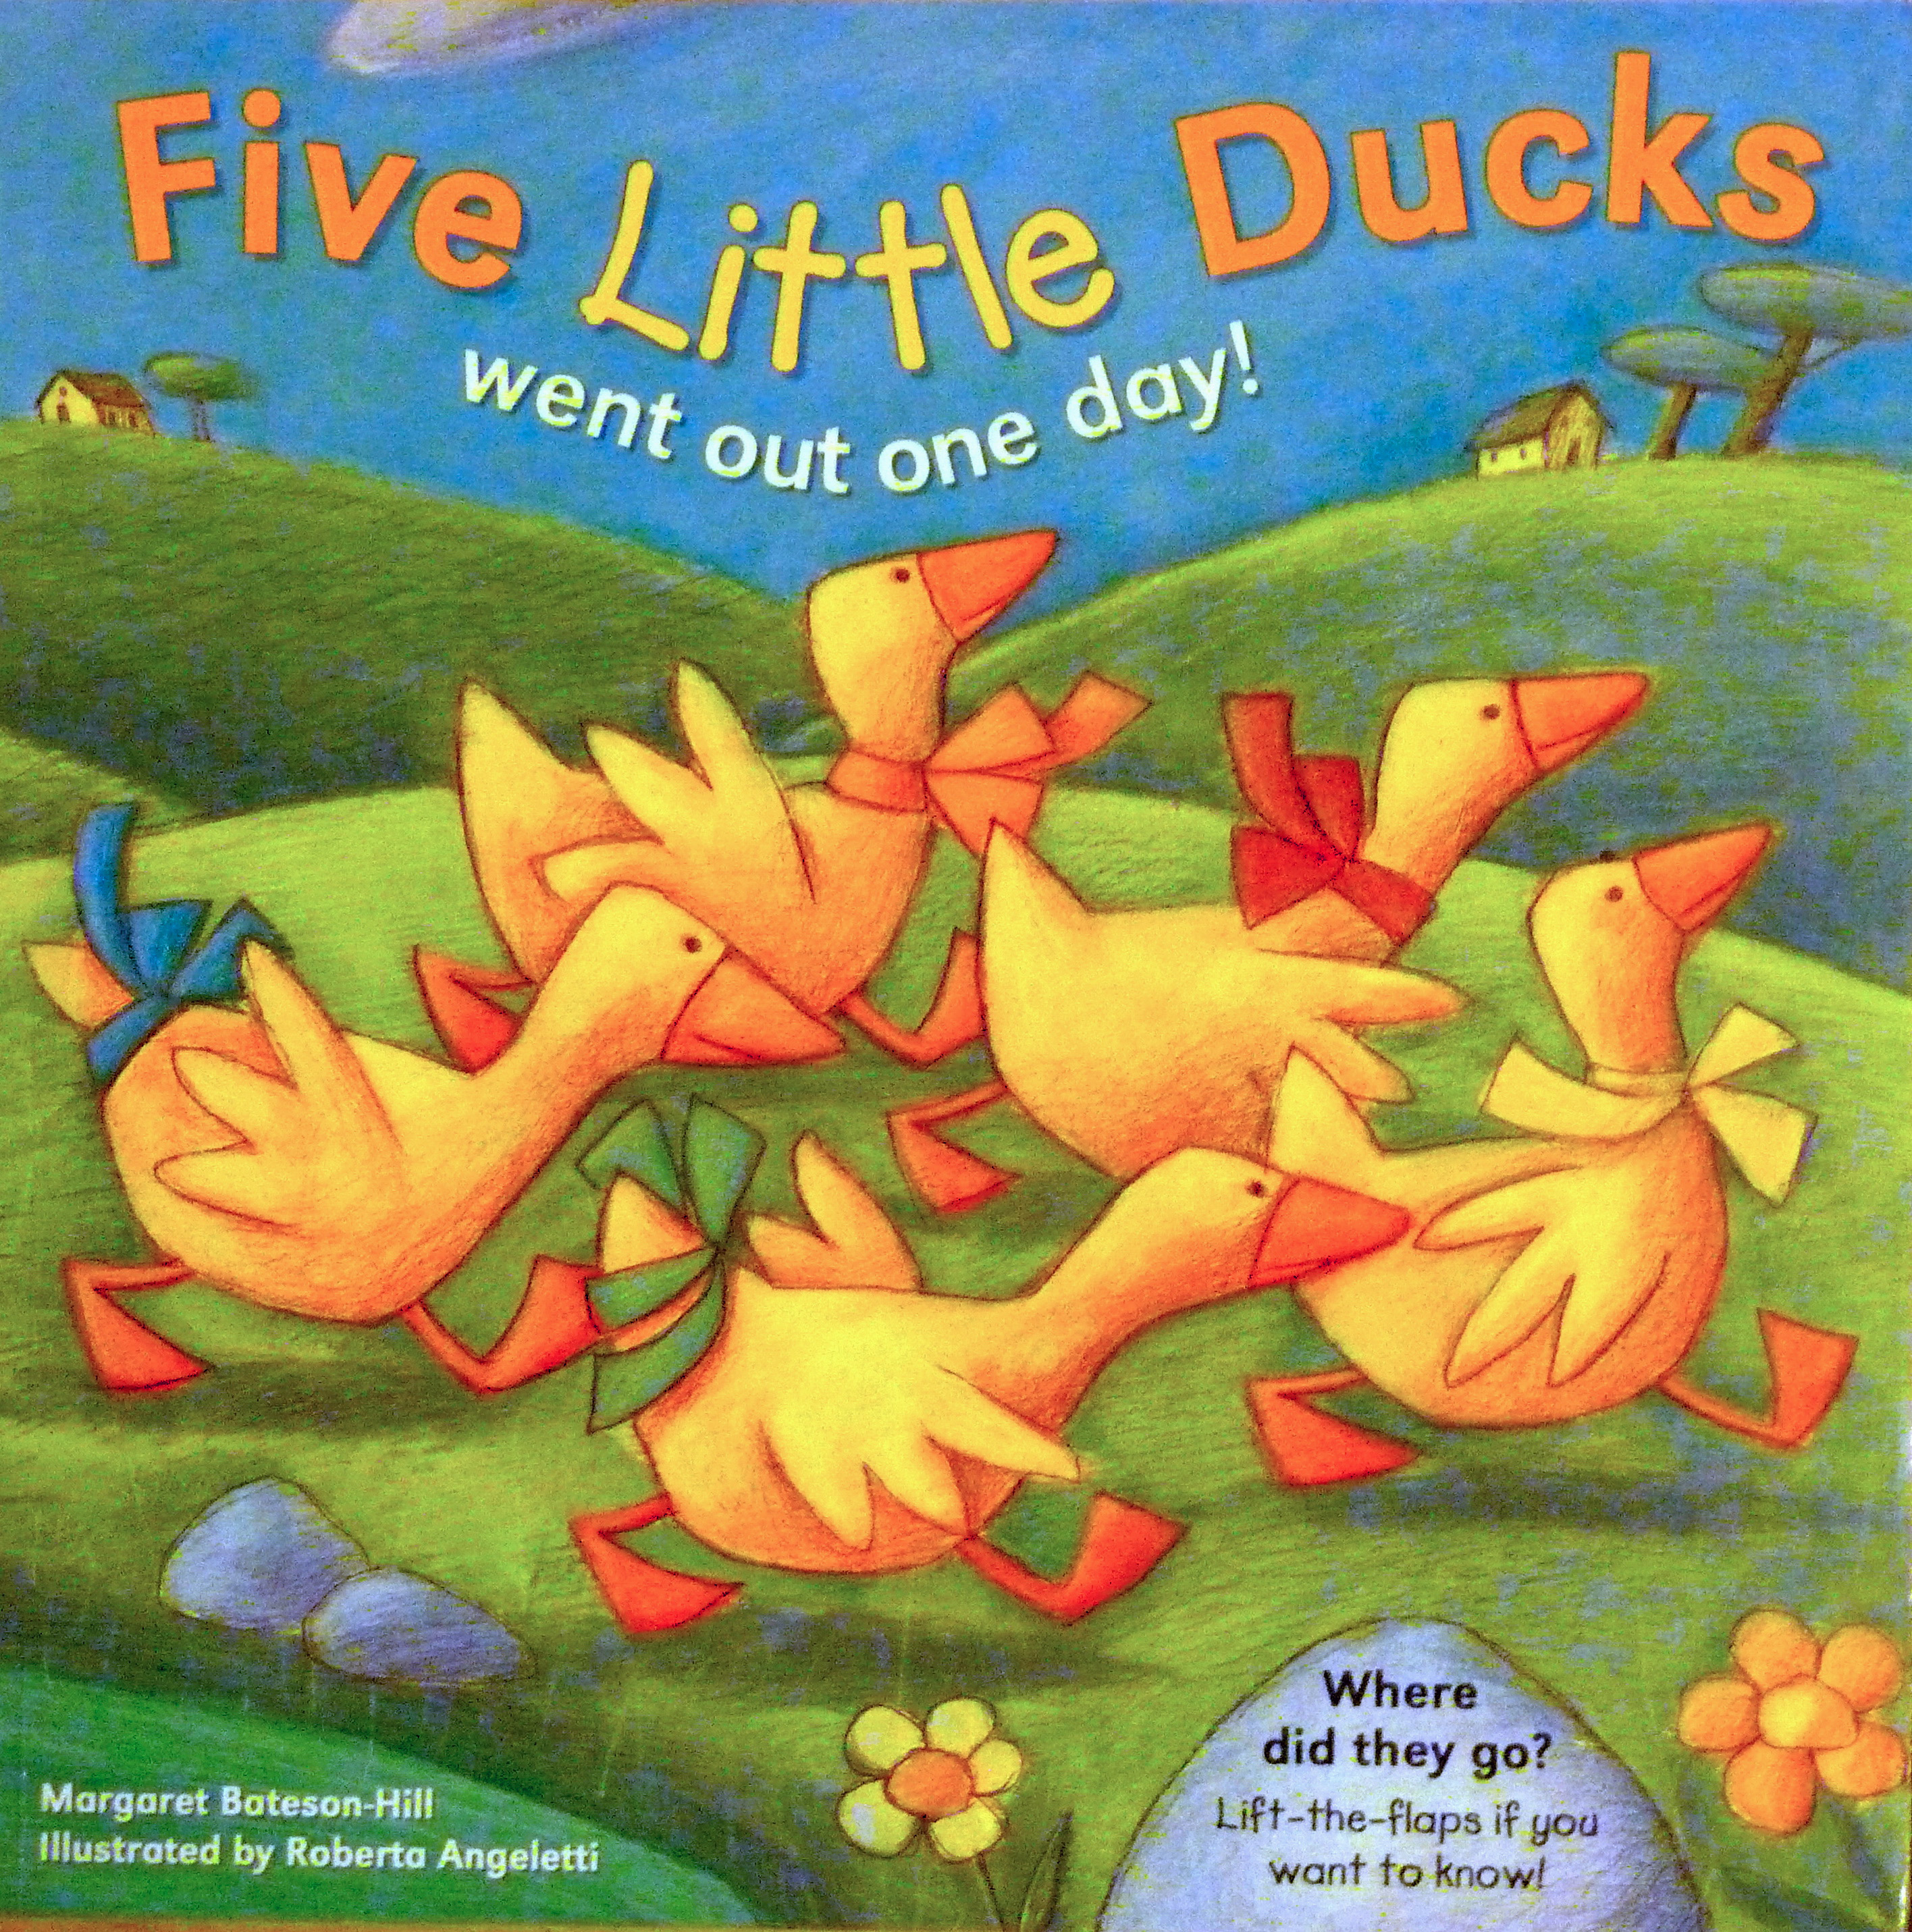 Five Little Ducks went out one day